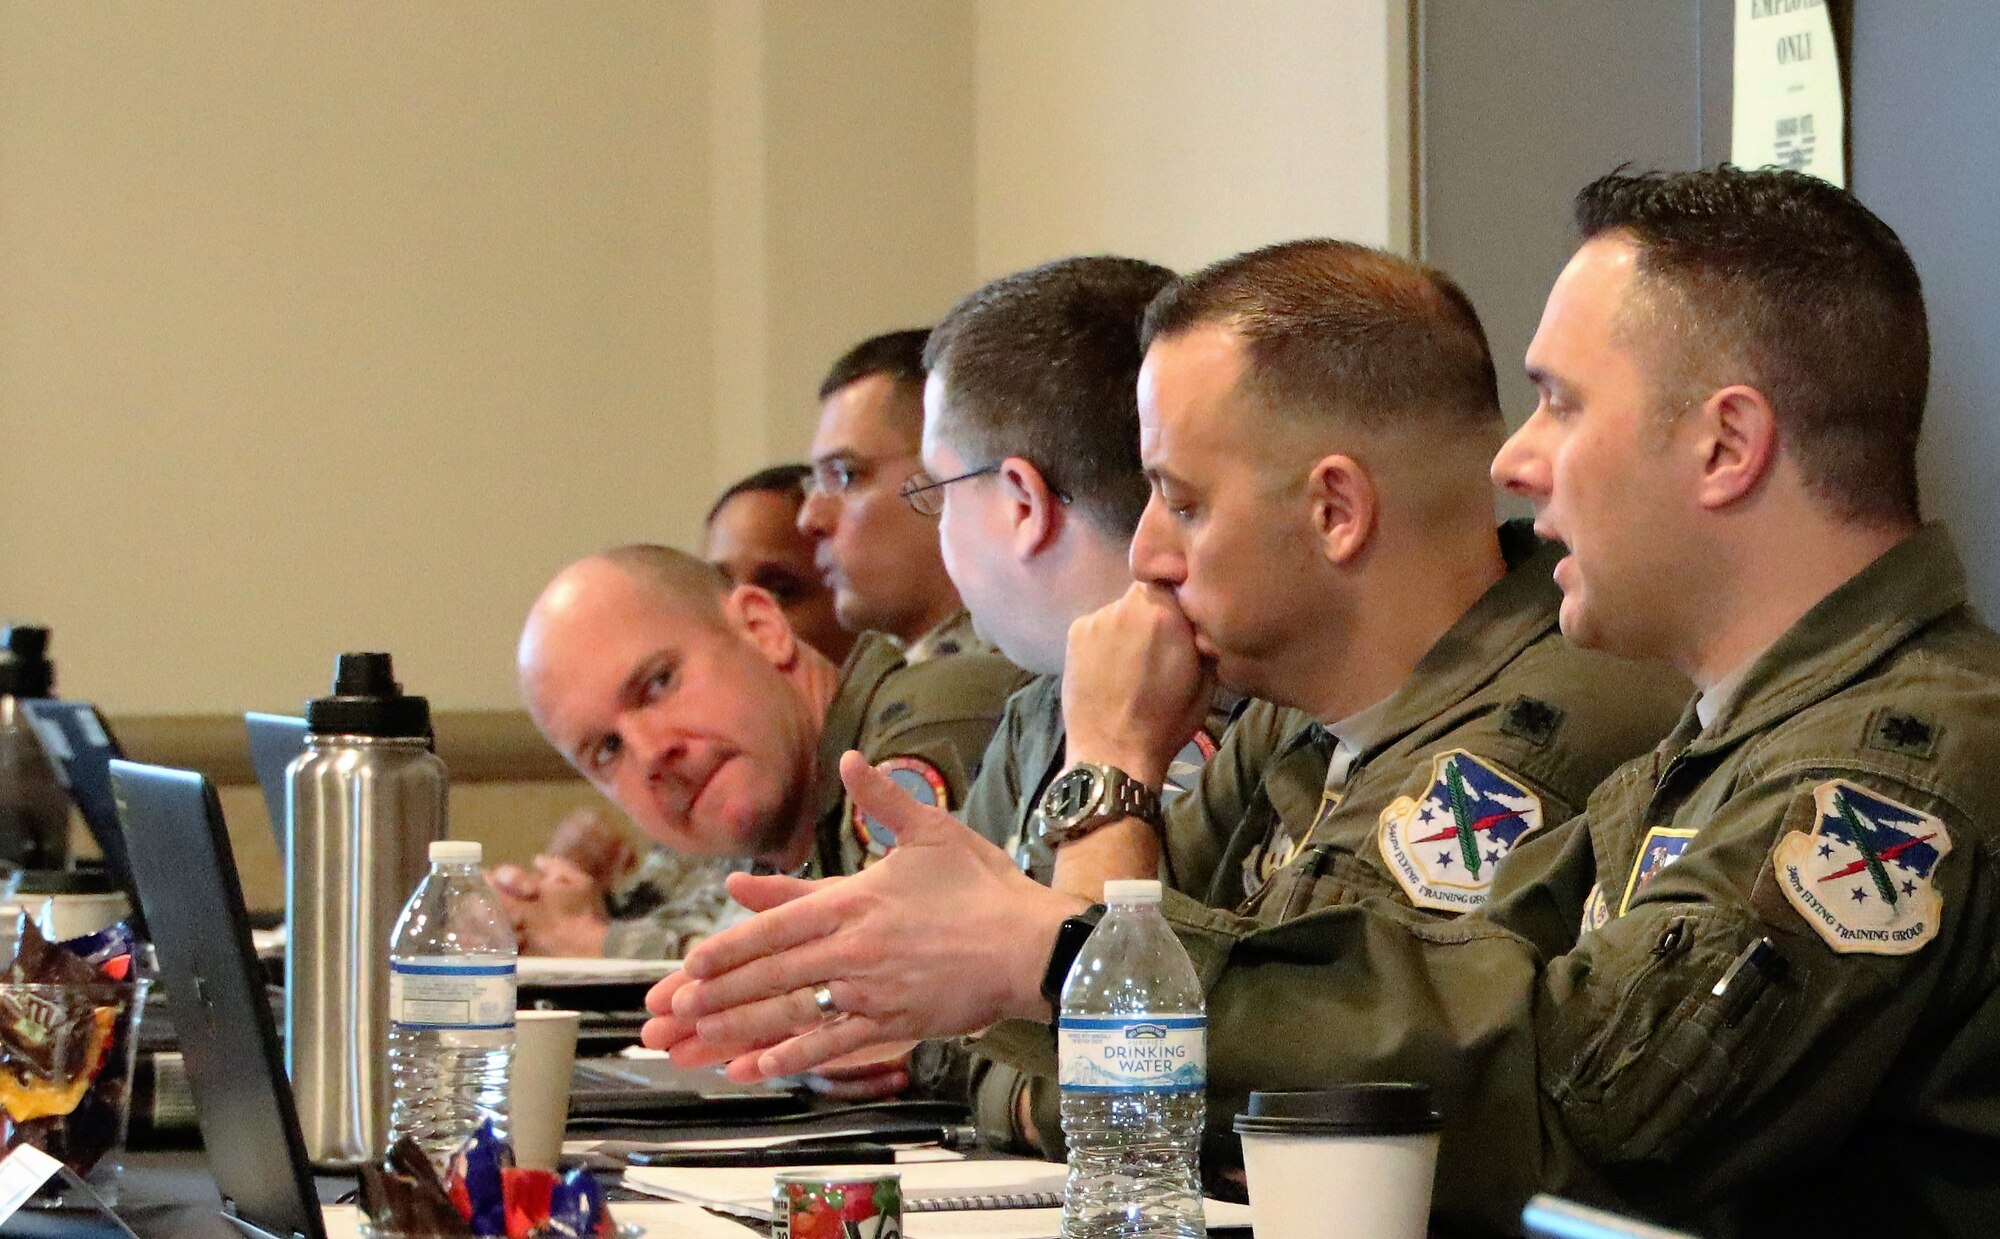 Group and squadron senior leaders discuss common concerns and successes during the 340th Flying Training Group semi-annual commanders’ summit held March 4-7 in Fredericksburg, Texas. (U.S. Air Force photo by Janis El Shabazz)